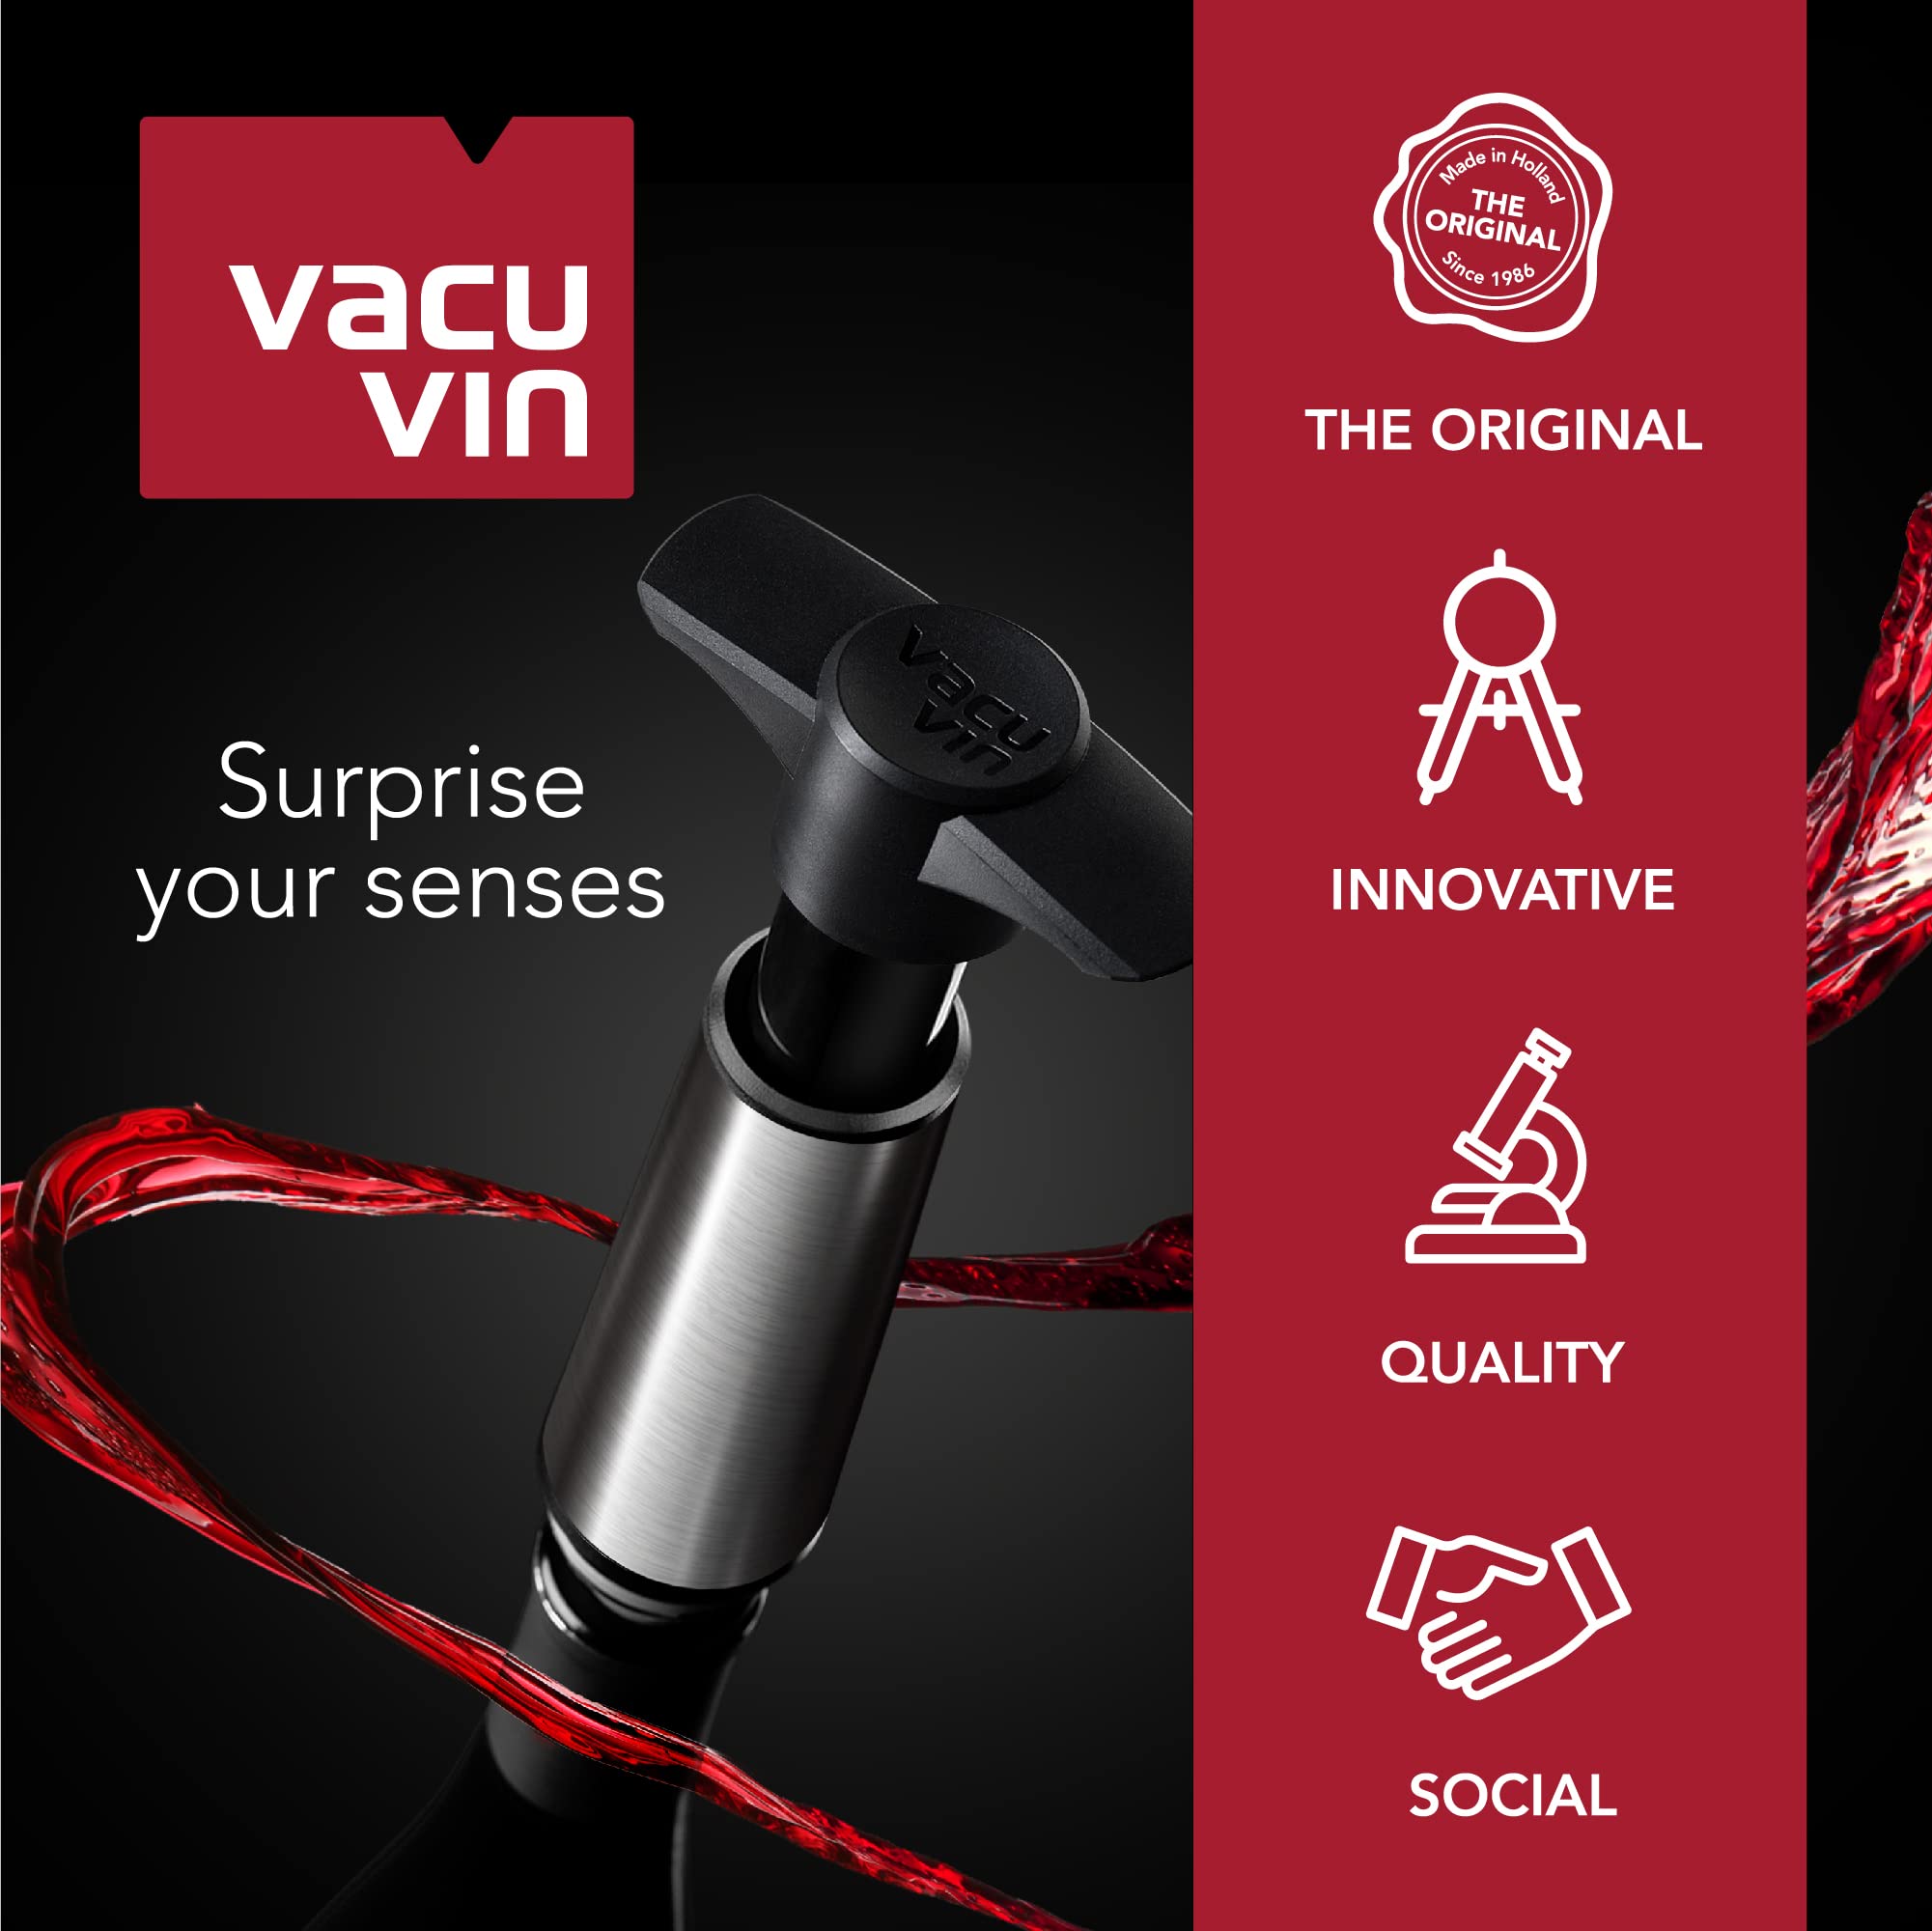 Vacu Vin Wine Saver Pump Grey with Vacuum Wine Stopper - Keep Your Wine Fresh for up to 10 Days - 1 Pump 2 Stoppers - Reusable - Made in the Netherlands